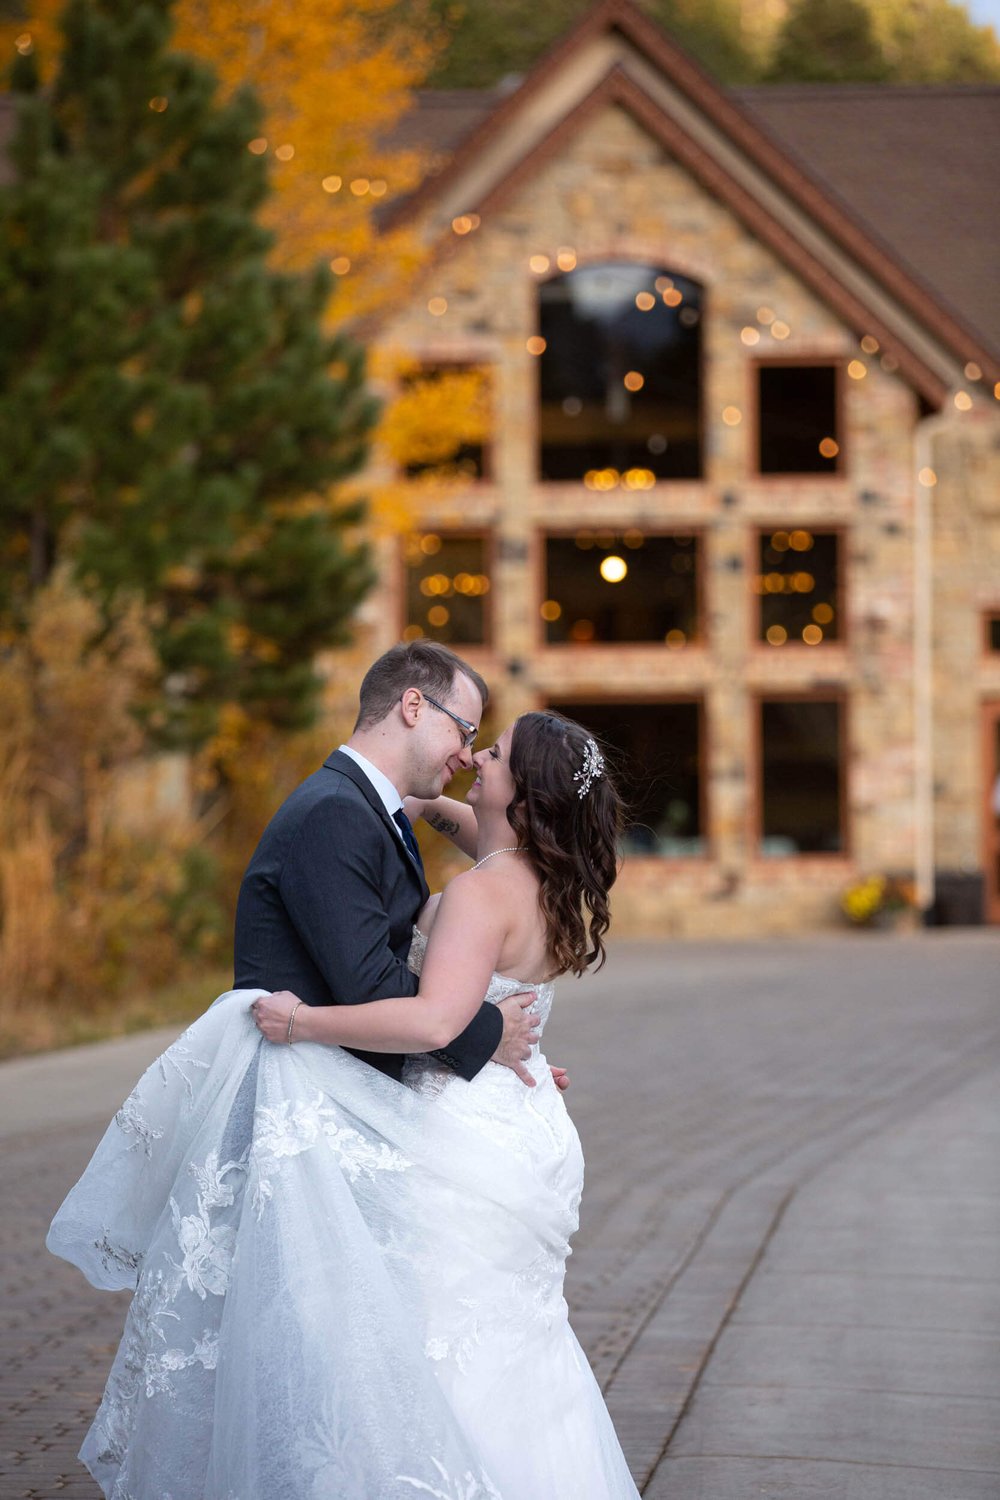 Bride and Groom at della terra mountain chateau by CliftonMarie